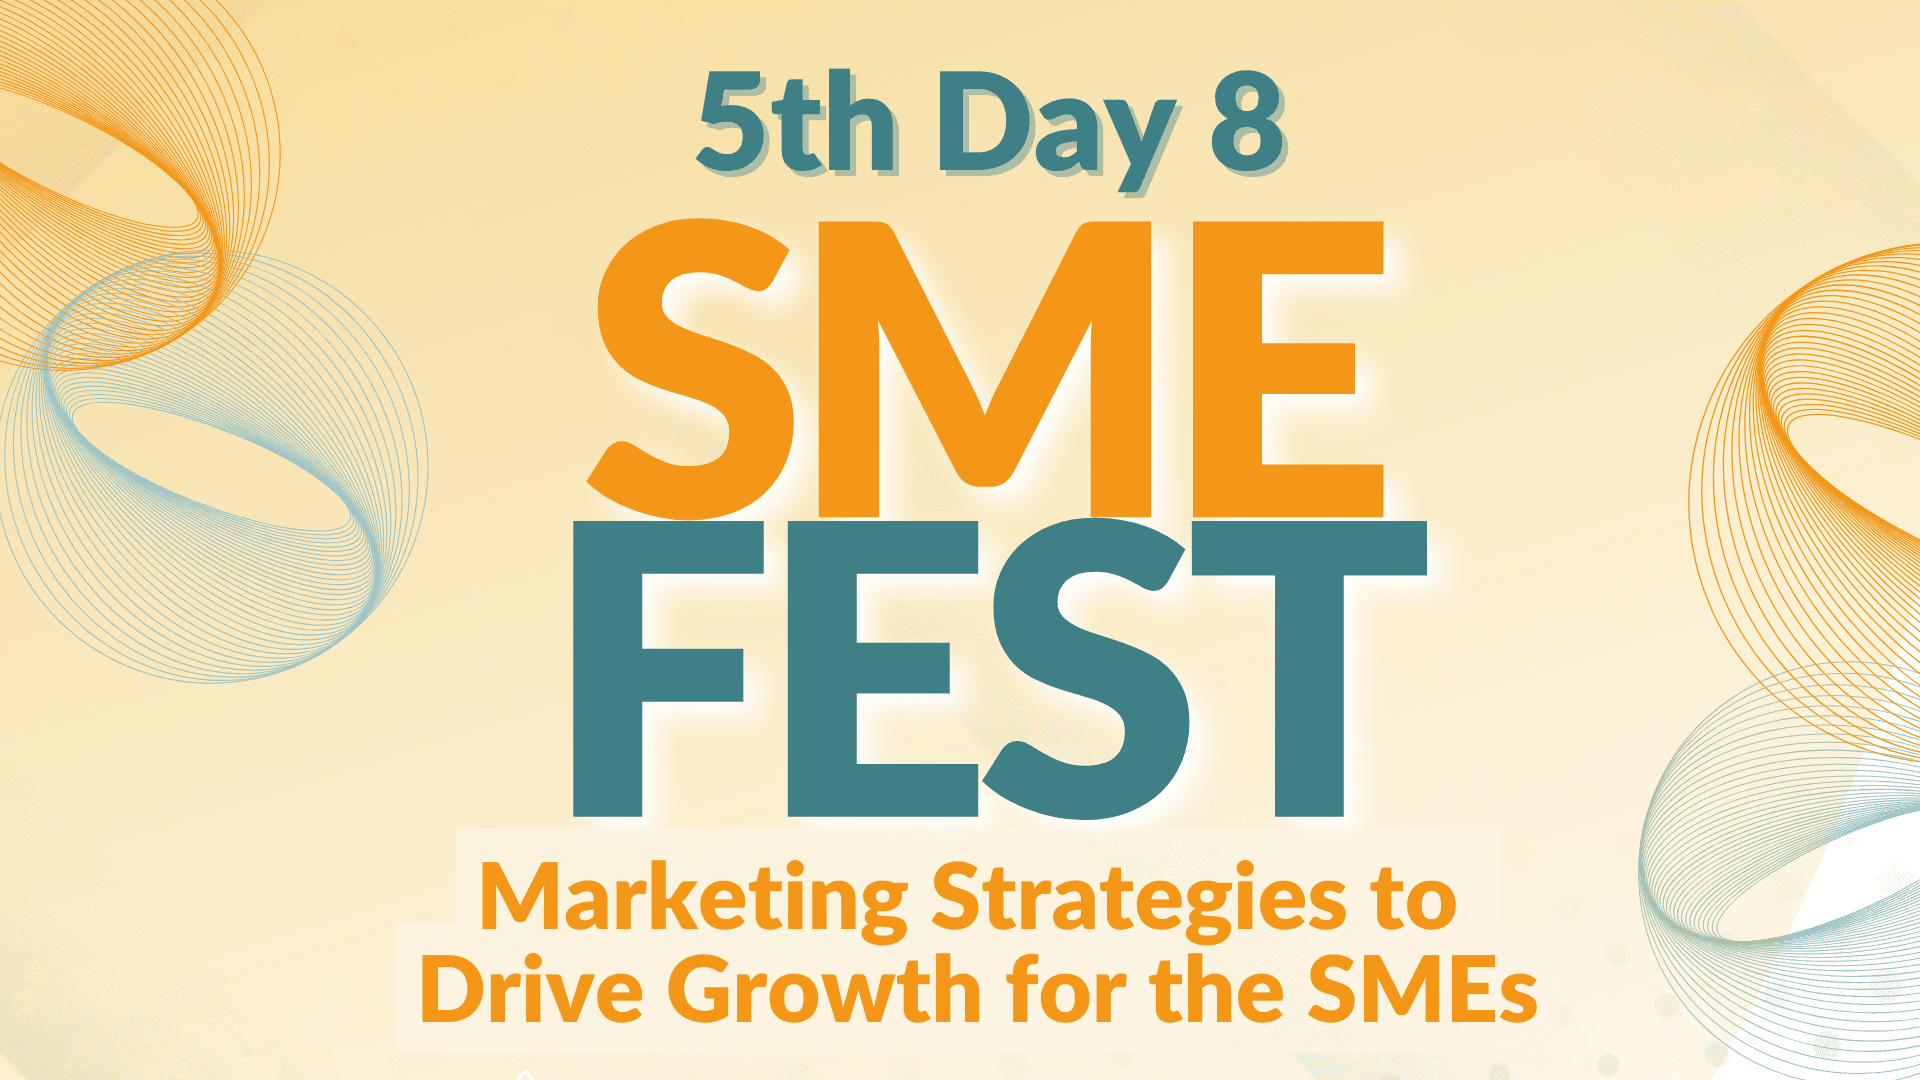 5th Day8 SME FEST by Josiah Go | Competing to Win